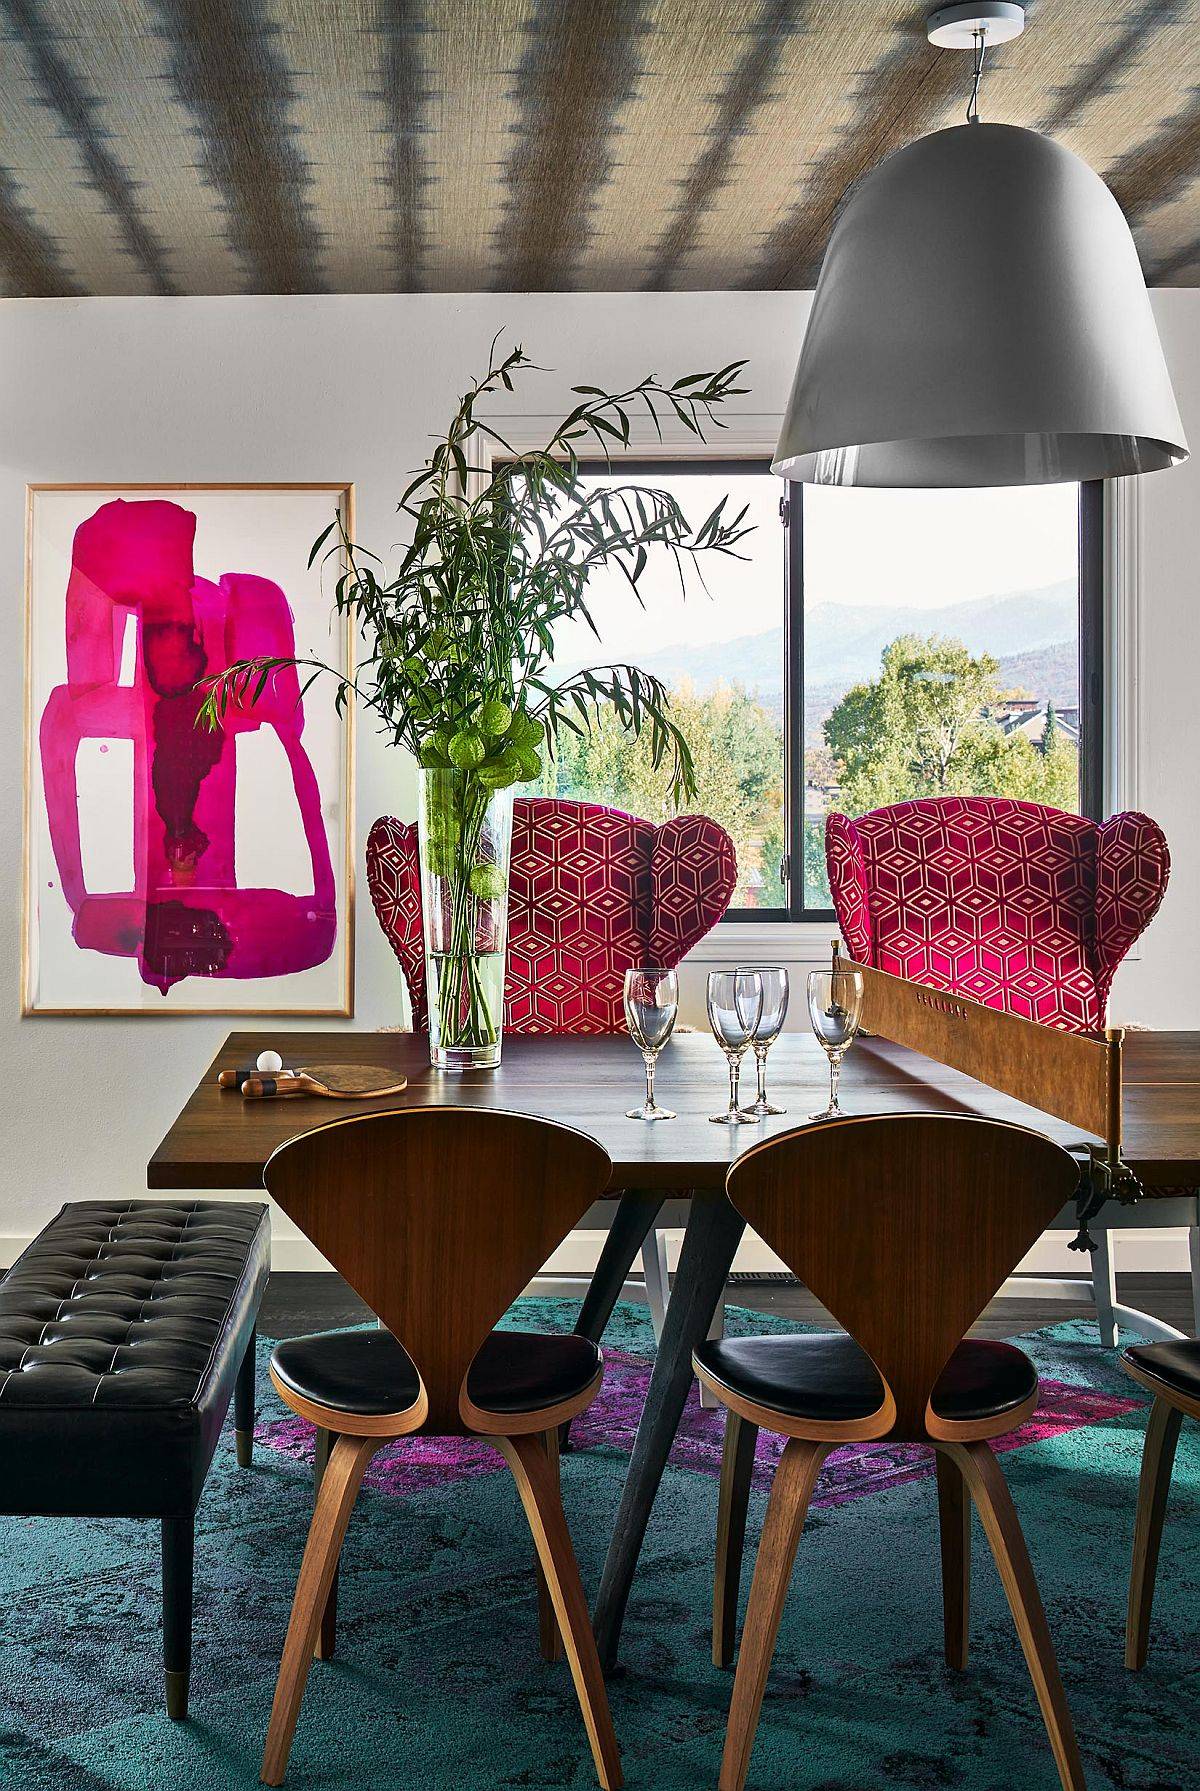 Captivating pops of fuchsia in the wall art piece accentuate the pink presence in this dining room